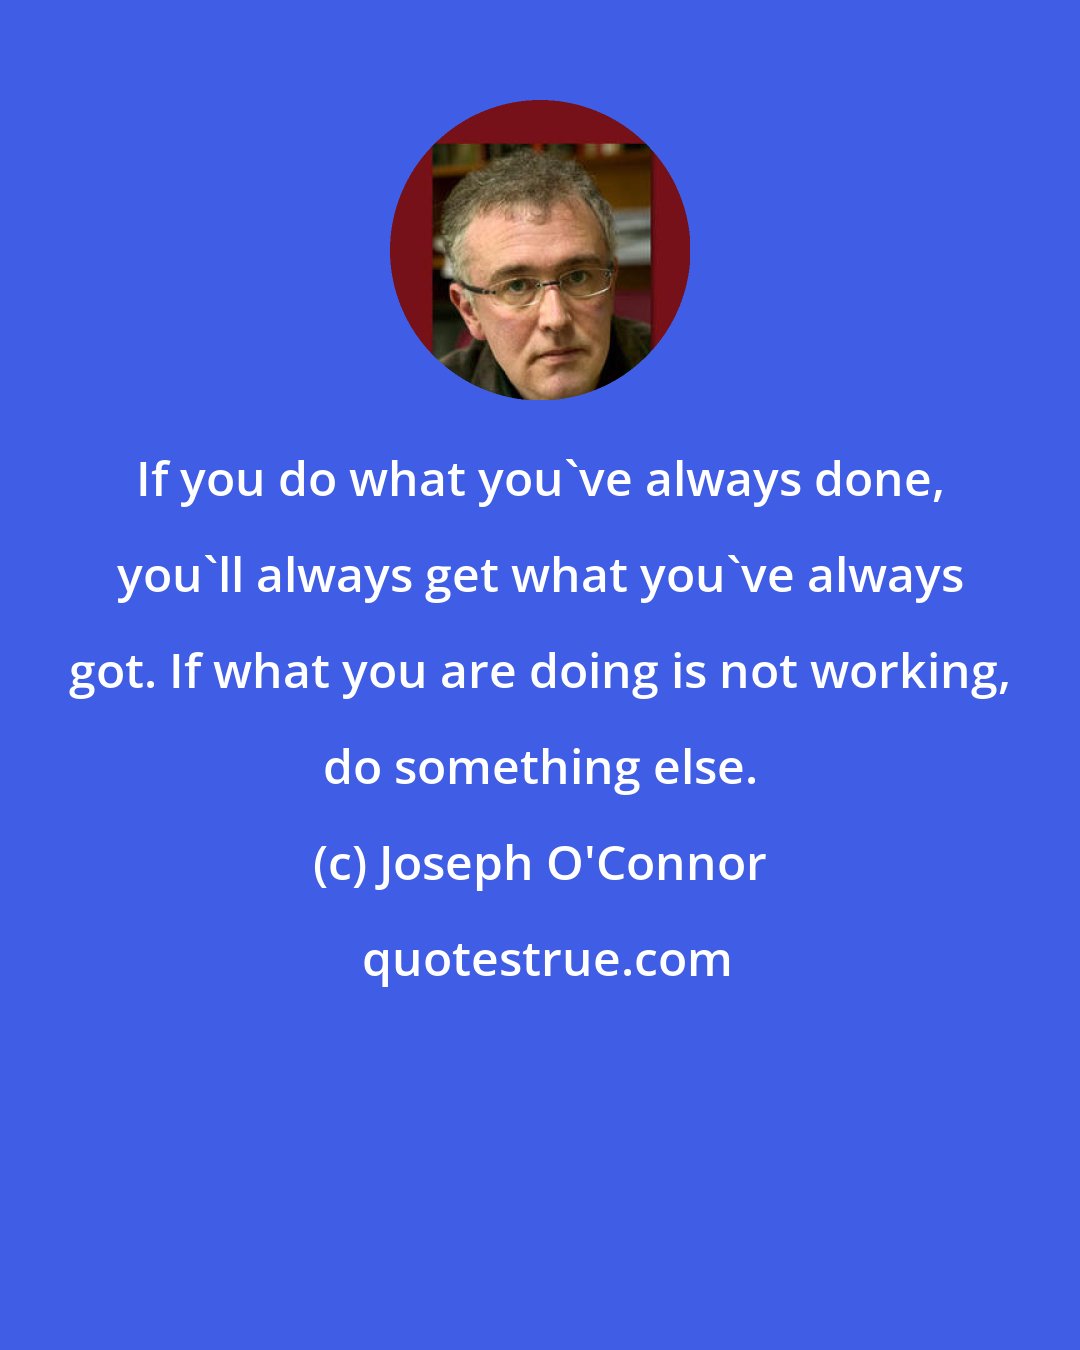 Joseph O'Connor: If you do what you've always done, you'll always get what you've always got. If what you are doing is not working, do something else.